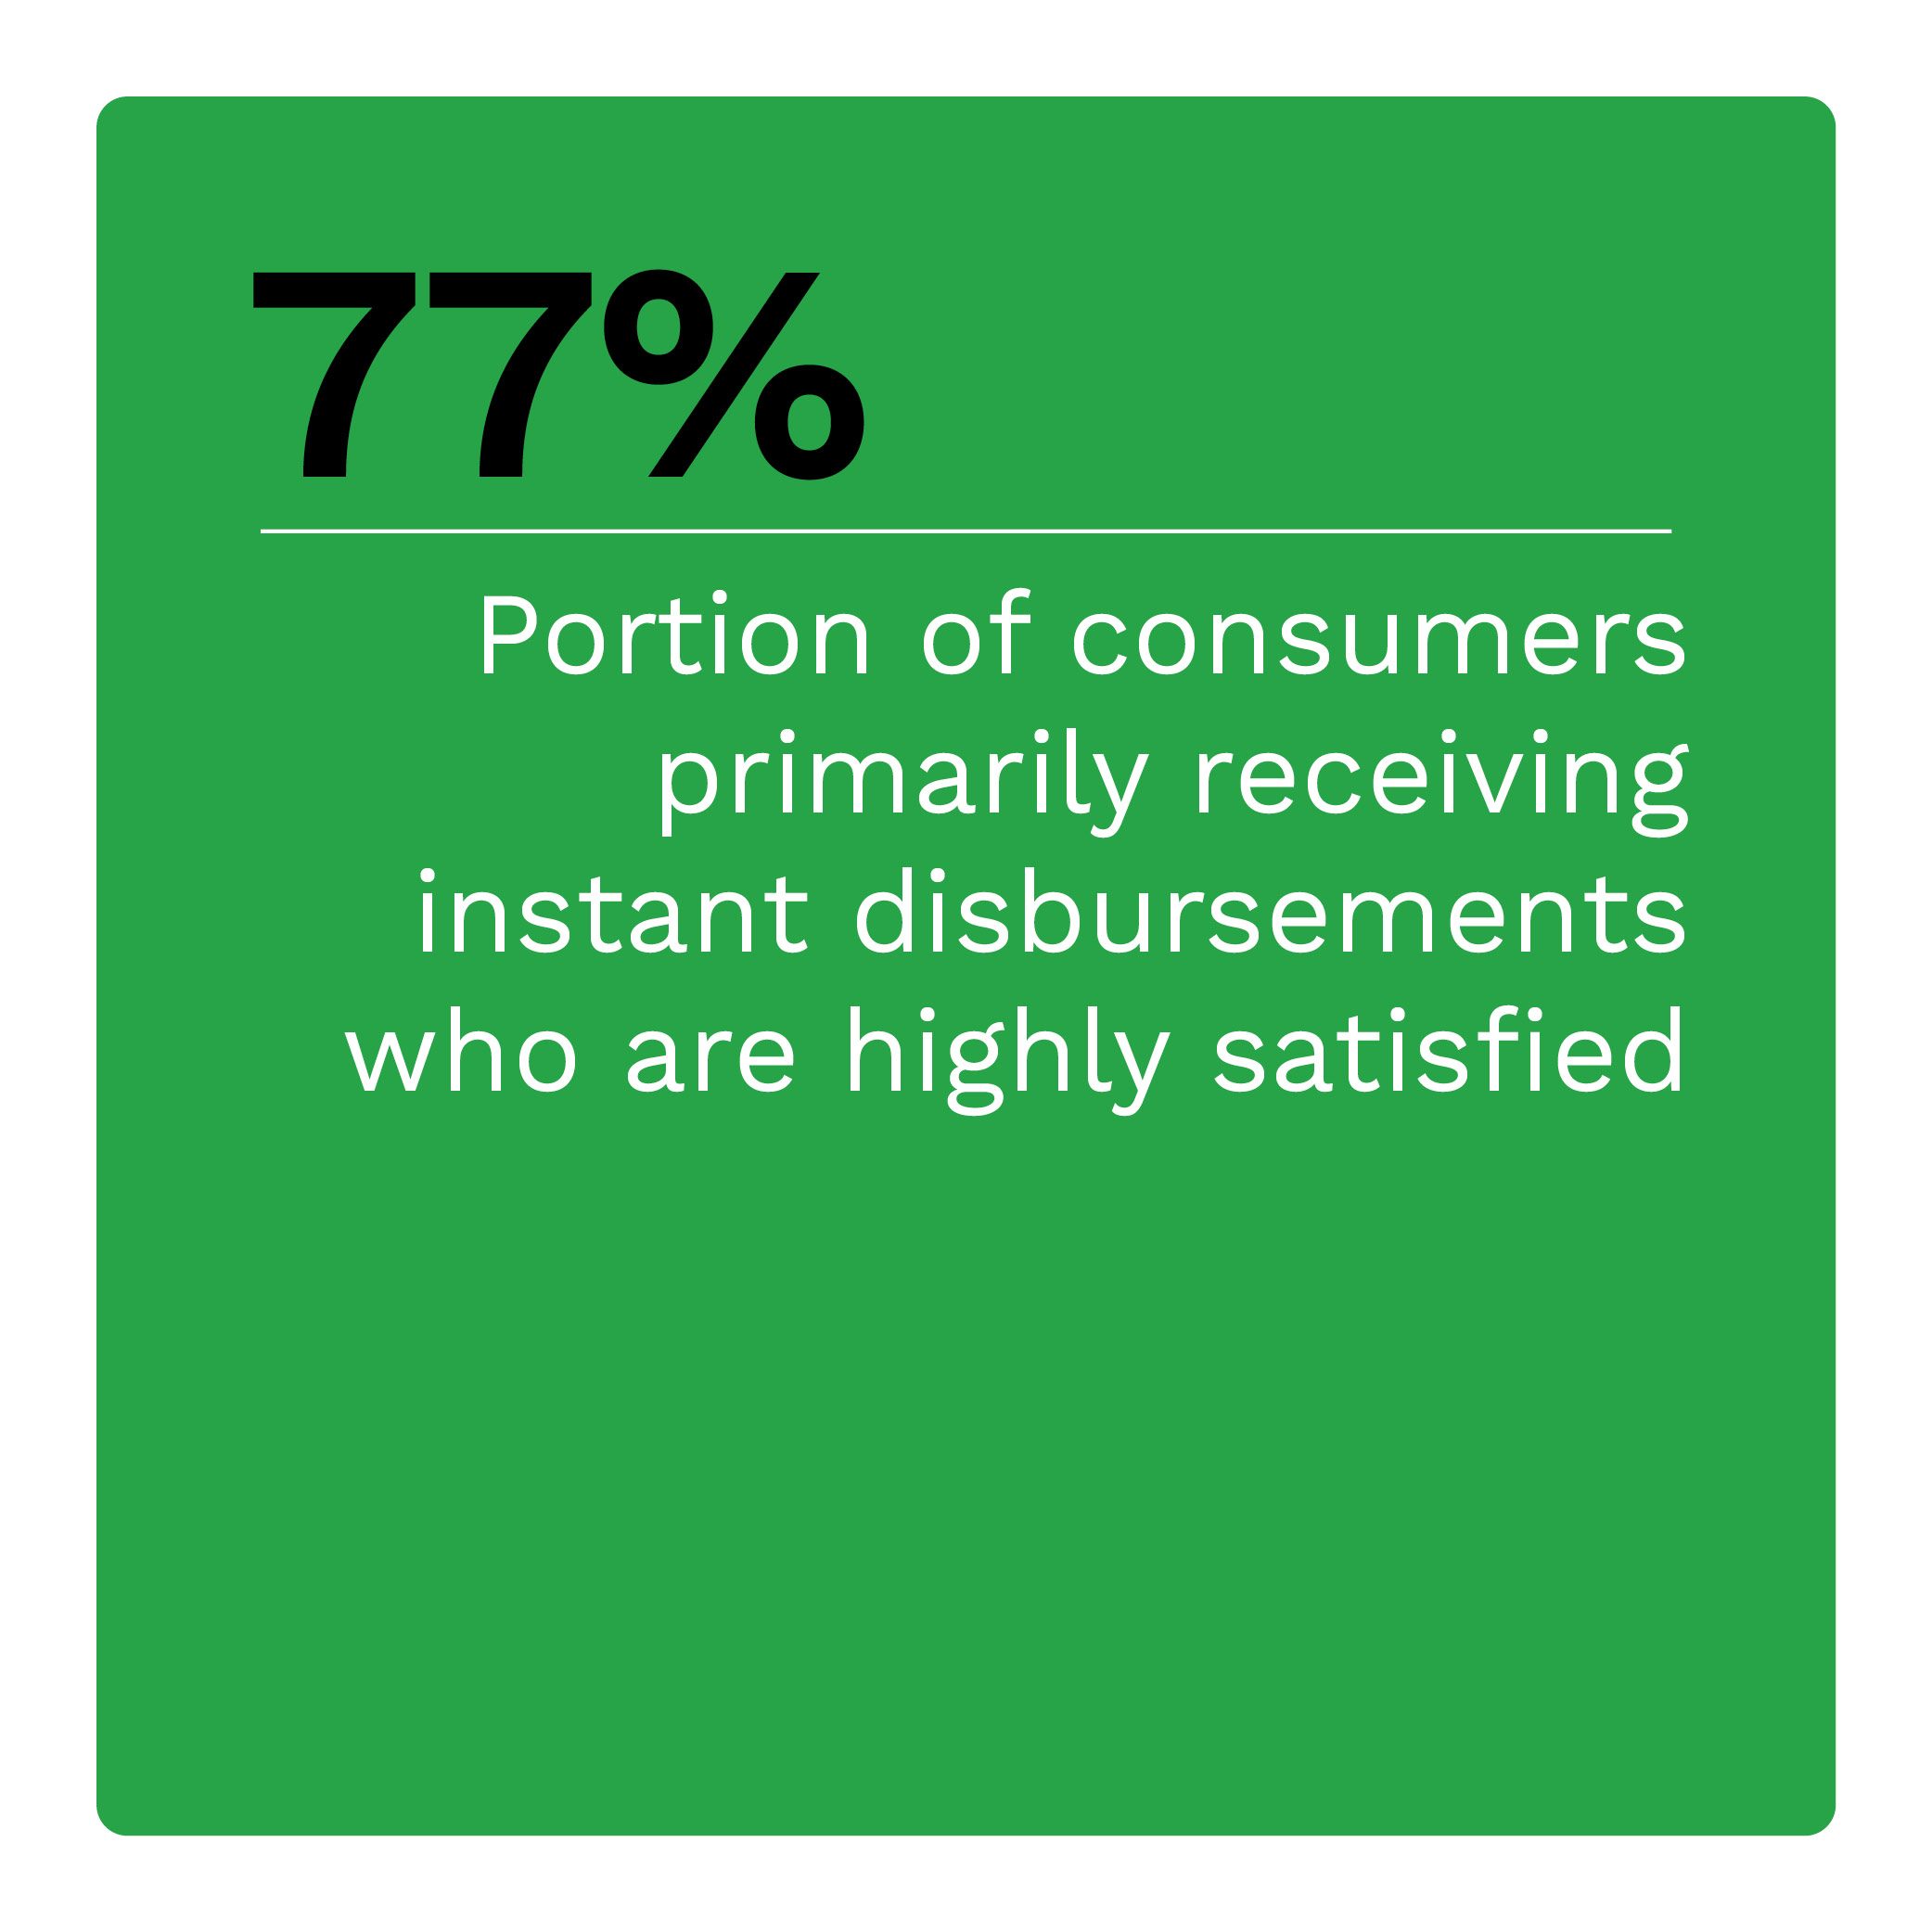  Portion of consumers primarily receiving instant disbursements who are highly satisfied